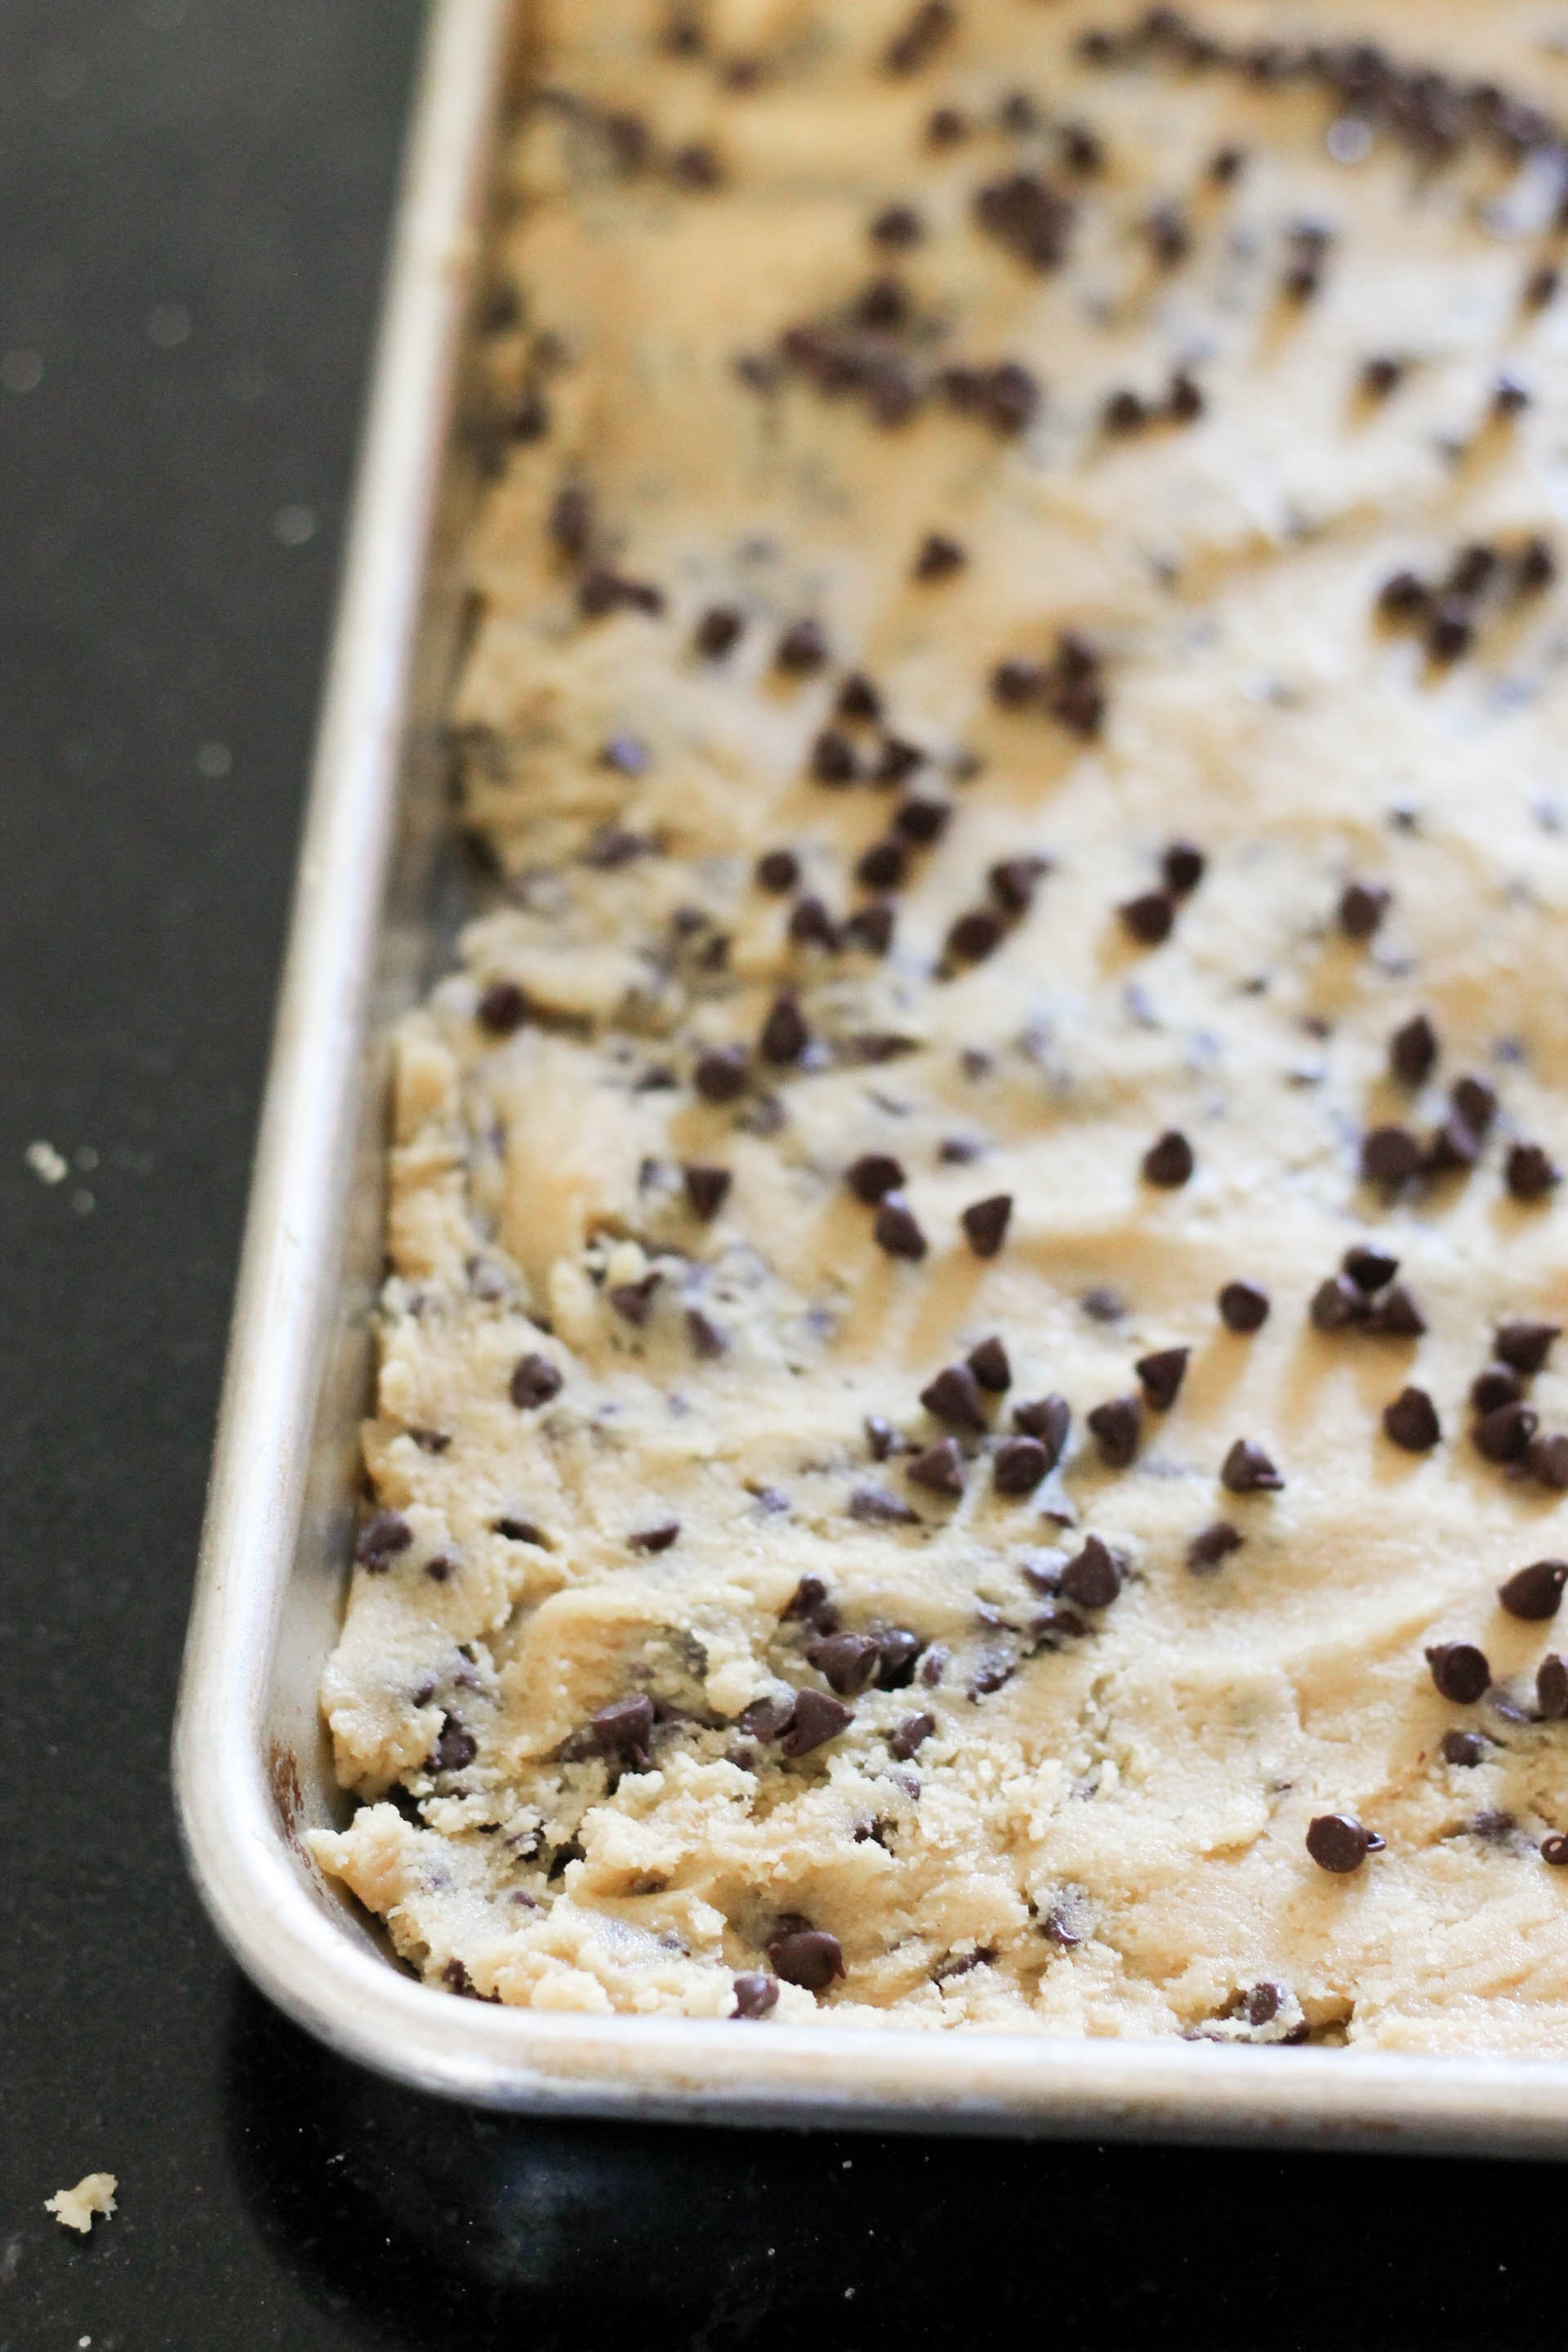 Pressed cookie dough unbaked in sheet pan